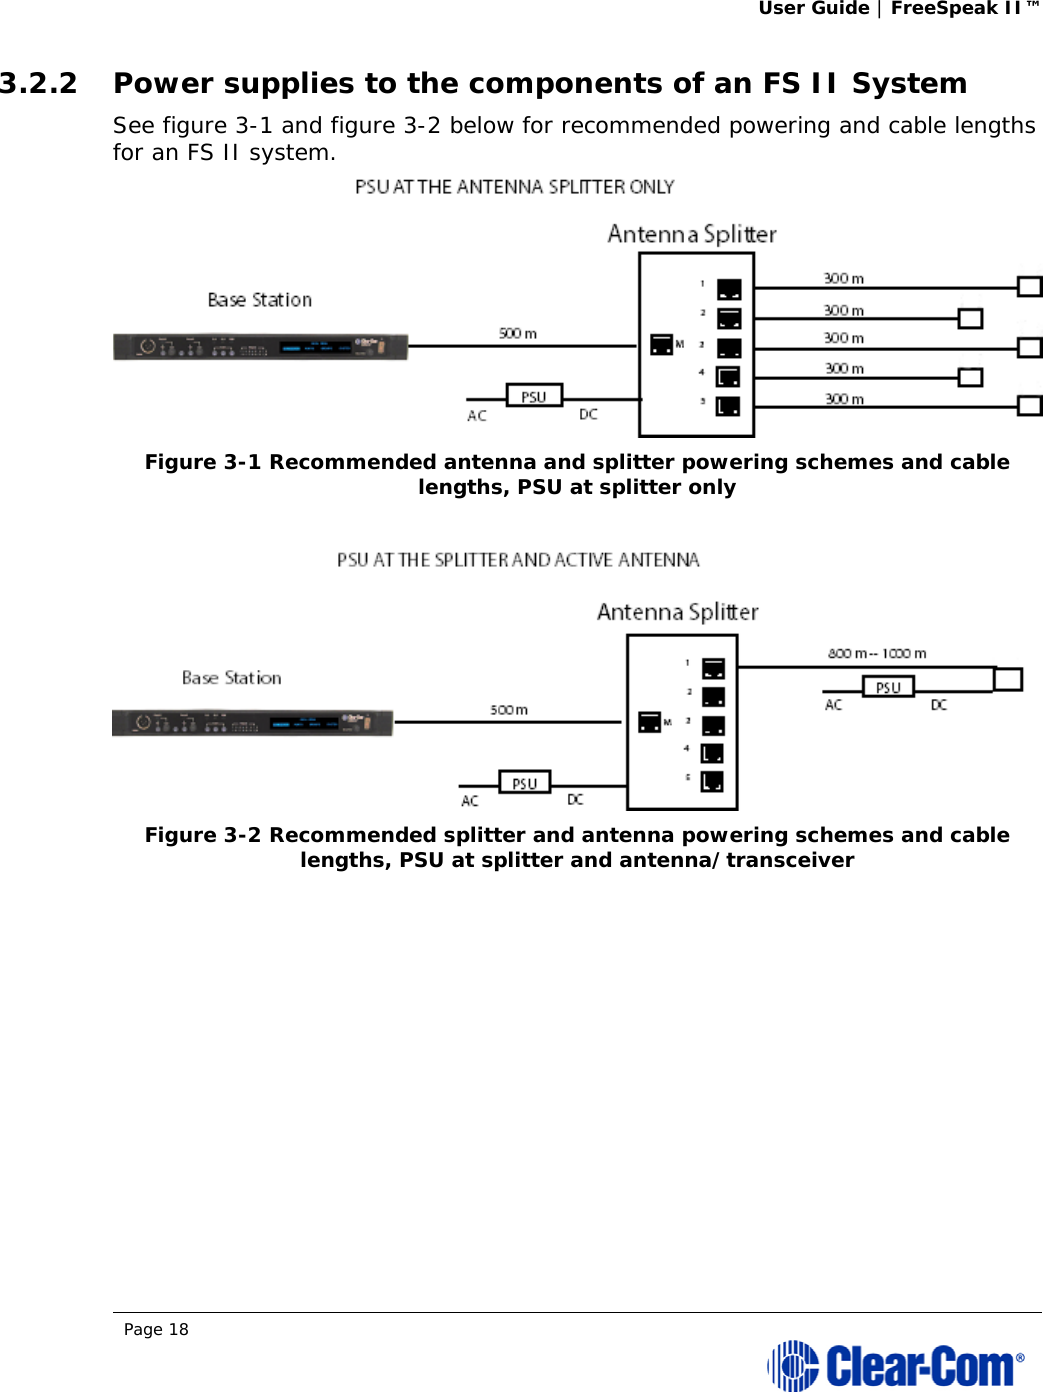 User Guide | FreeSpeak II™  Page 18  3.2.2 Power supplies to the components of an FS II System See figure 3-1 and figure 3-2 below for recommended powering and cable lengths for an FS II system.   Figure 3-1 Recommended antenna and splitter powering schemes and cable lengths, PSU at splitter only    Figure 3-2 Recommended splitter and antenna powering schemes and cable lengths, PSU at splitter and antenna/transceiver   